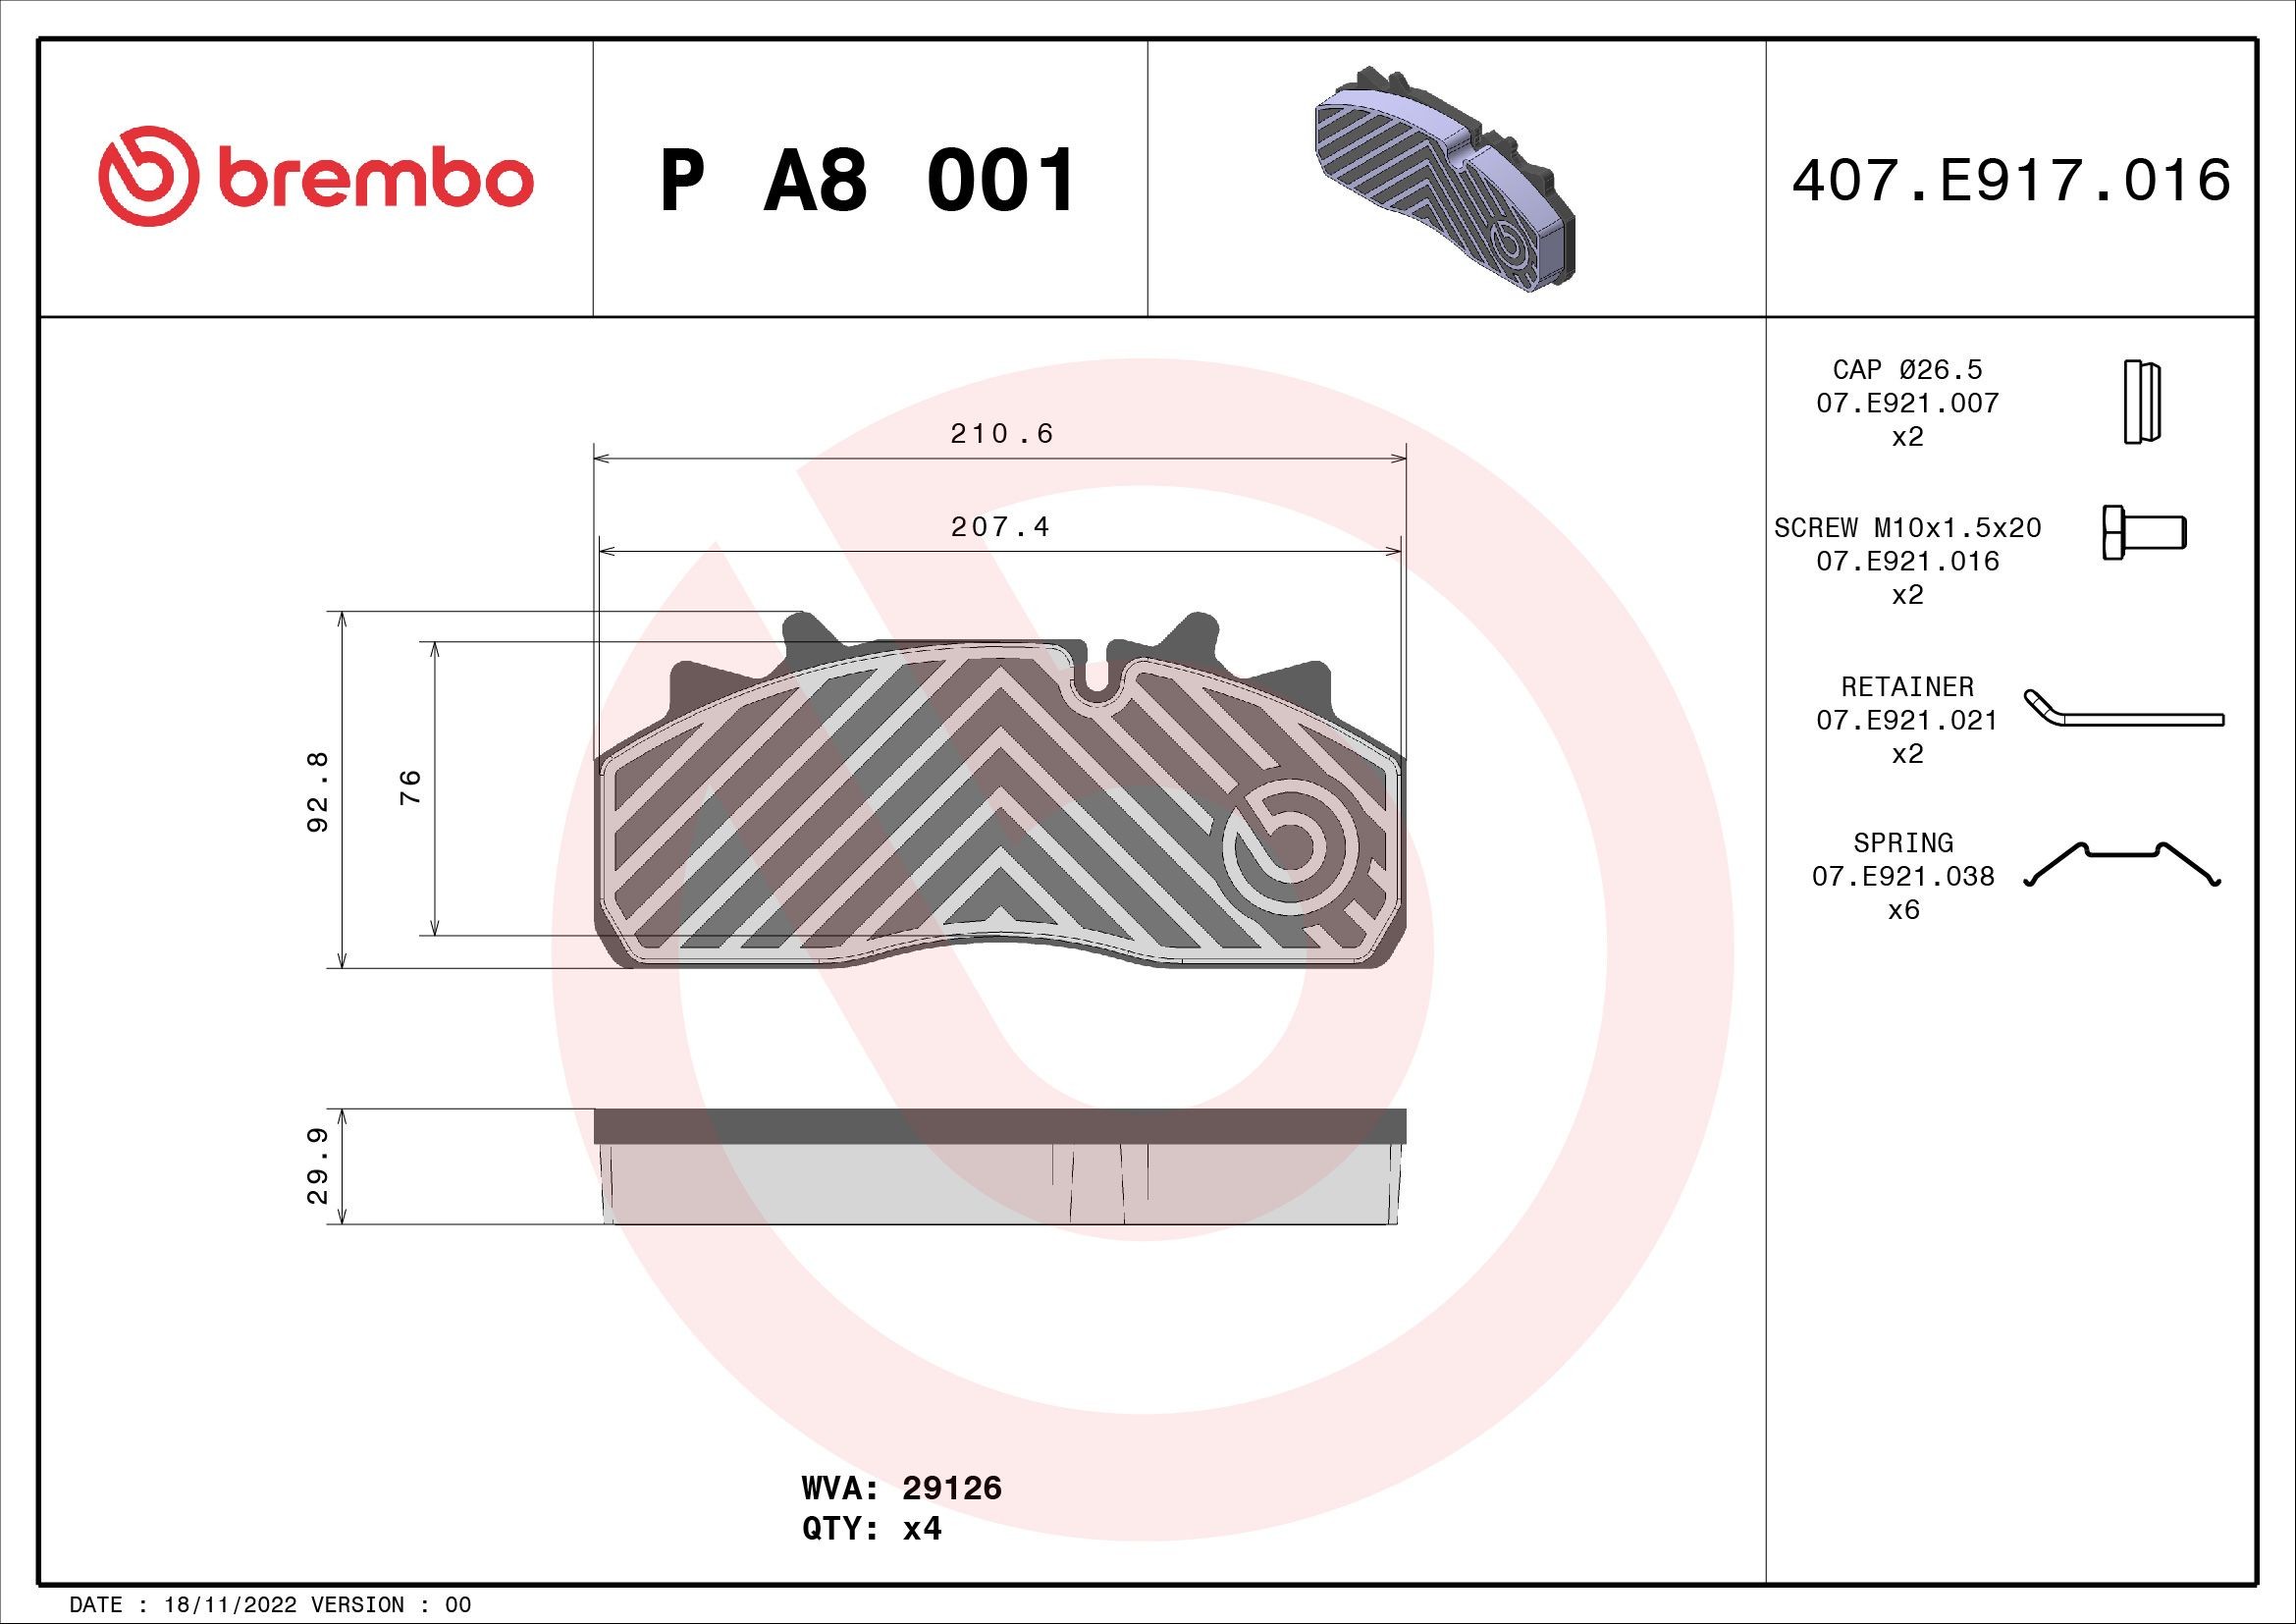 BREMBO prepared for wear indicator, with accessories Height: 93mm, Width: 211mm, Thickness: 30mm Brake pads P A8 001 buy